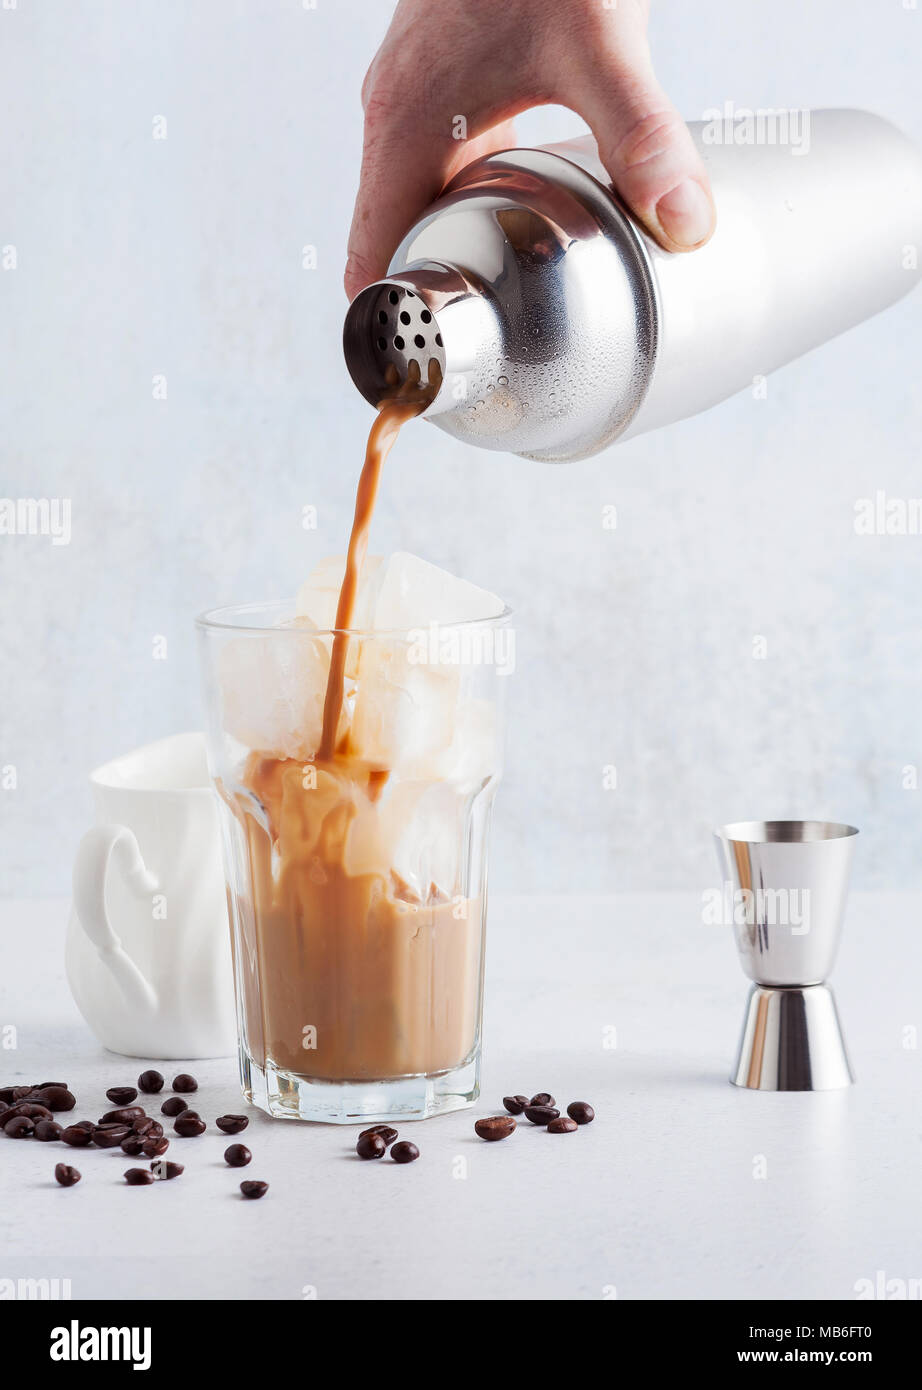 https://c8.alamy.com/comp/MB6FT0/pour-from-a-shaker-coffee-frappe-in-a-tall-glass-with-ice-MB6FT0.jpg